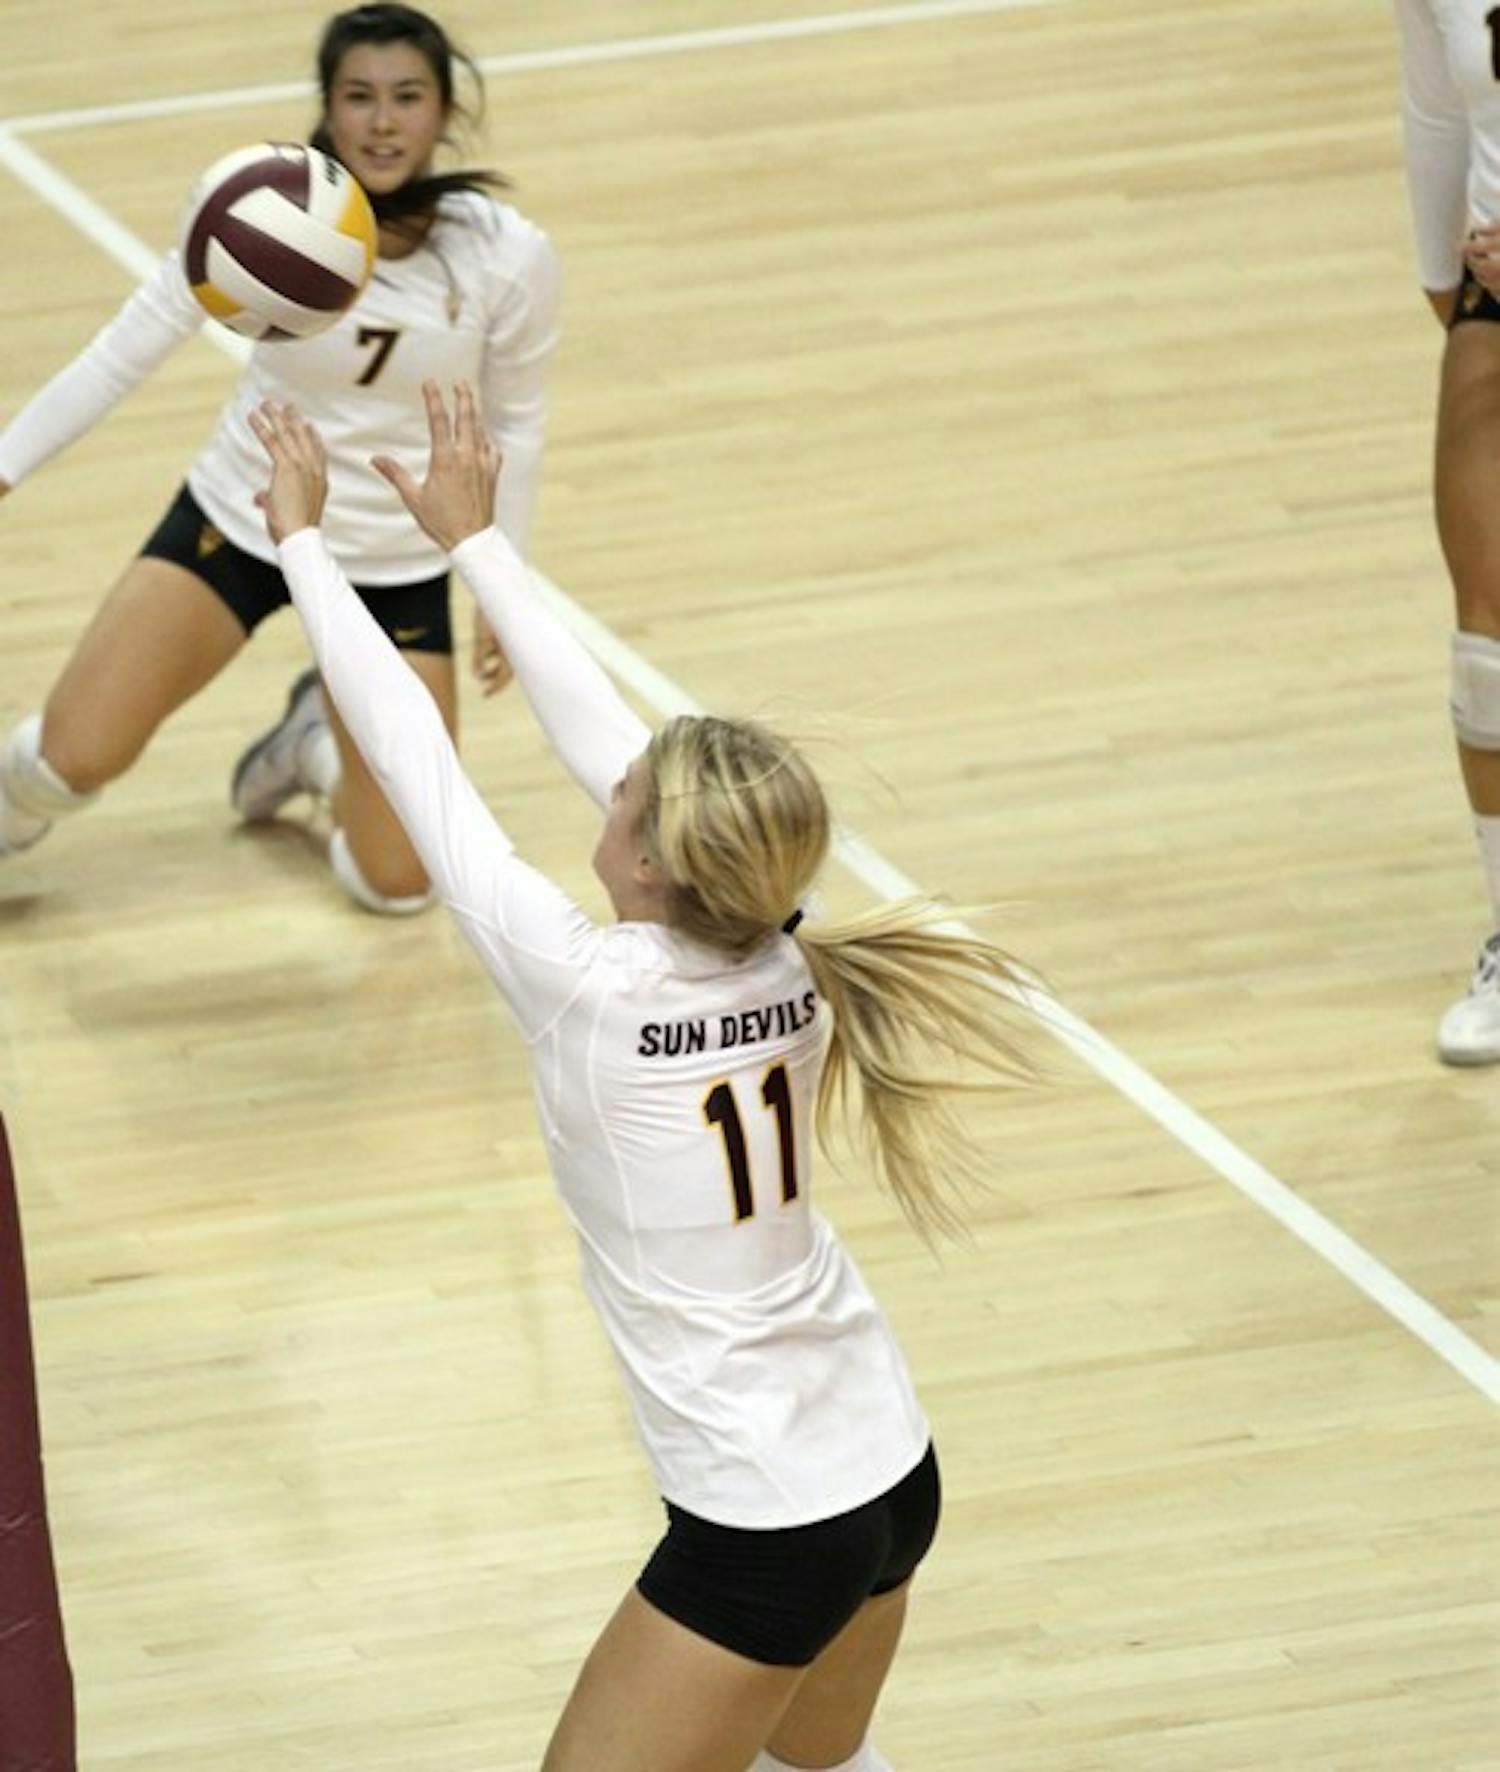 OFFENSIVE SPARK: Senior outside hitter Sarah Reaves returns a volley during a recent match as senior libero Sarah Johnson looks on. Reaves leads ASU's offensive attack, which the team is trying to improve. (Photo by Scott Stuk)